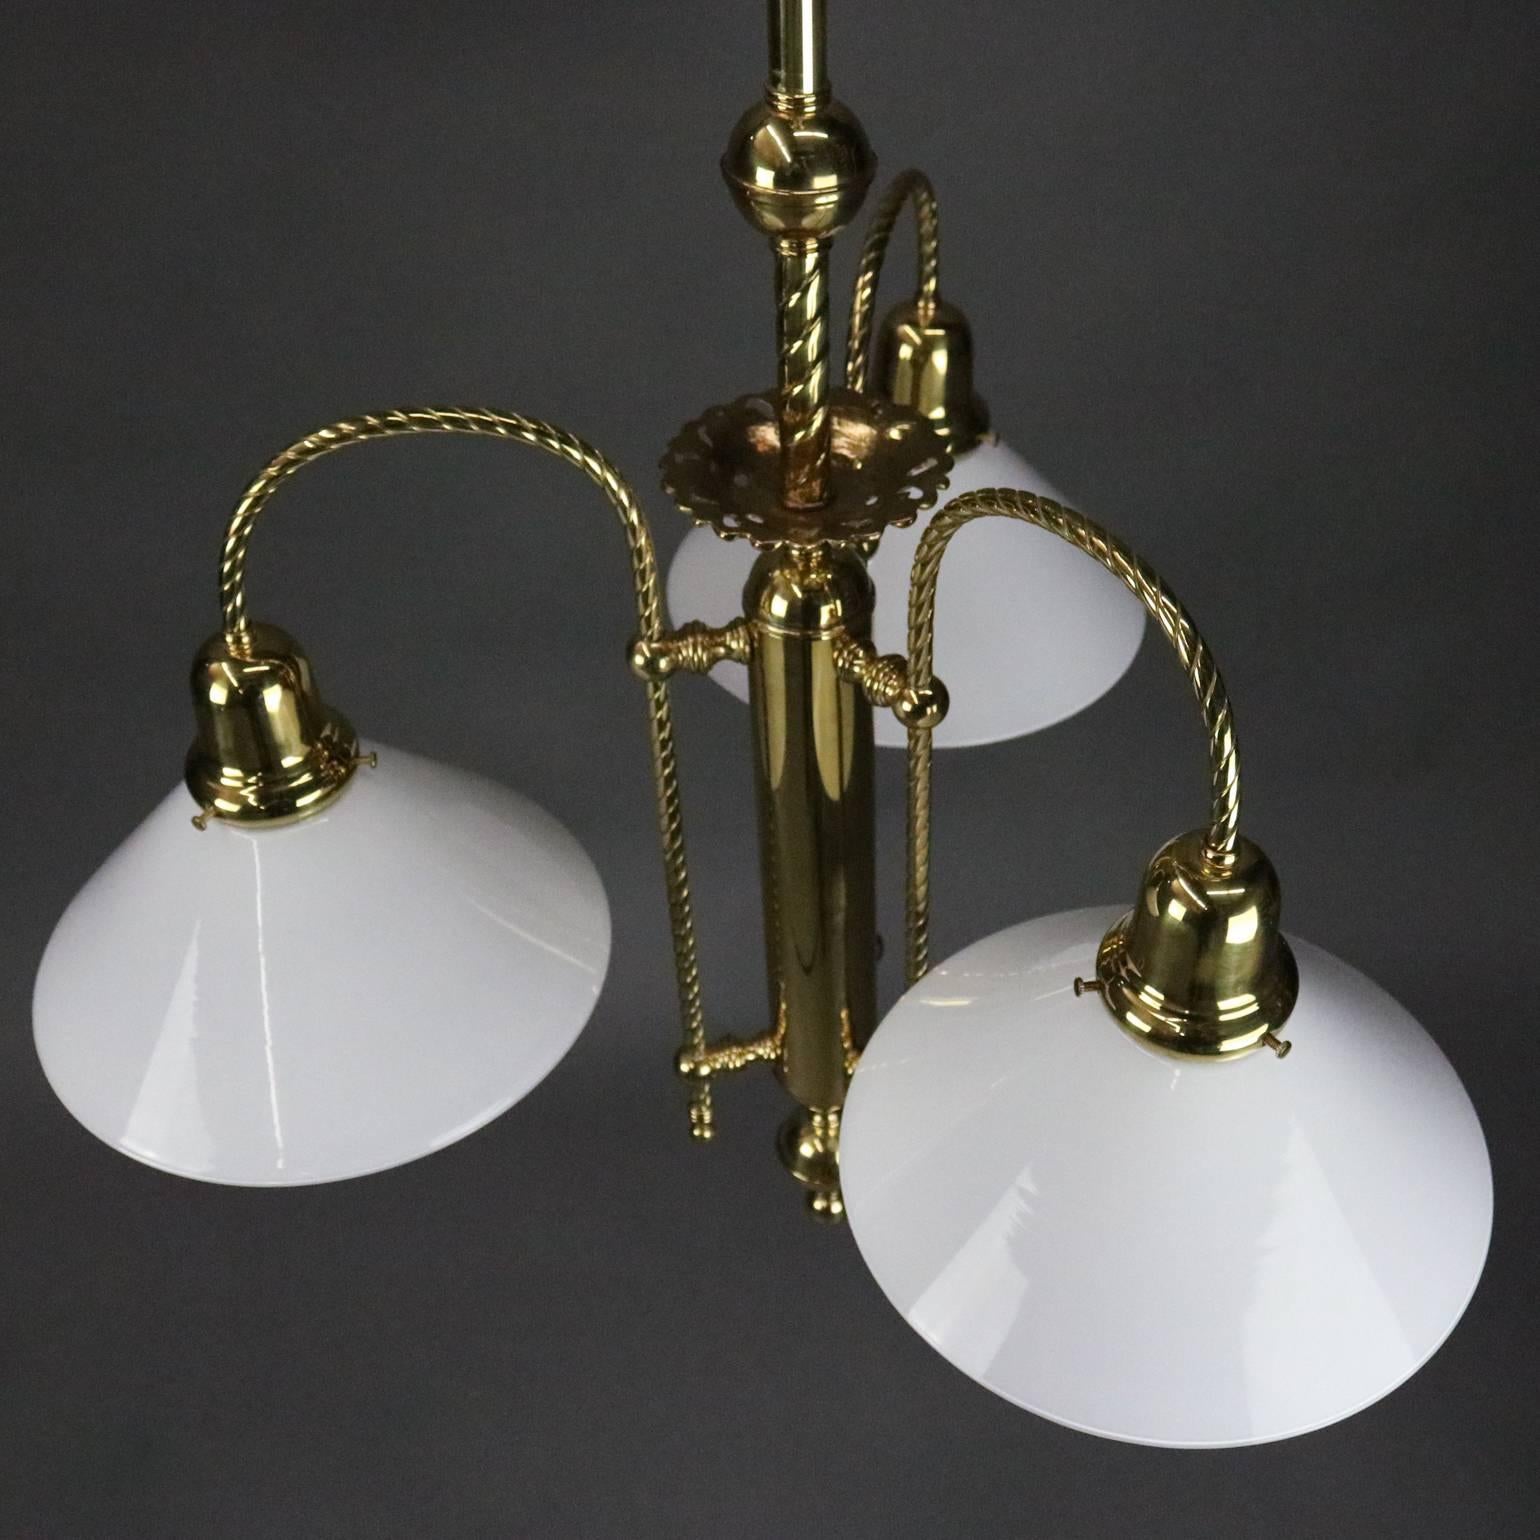 Vintage French hanging light fixture features three twisted rope arms terminating in opaque conical shades, 20th century

Additional identical fixture listed separately*

Measures - 36.5" drop x 27"diam, 2"diam fitter.